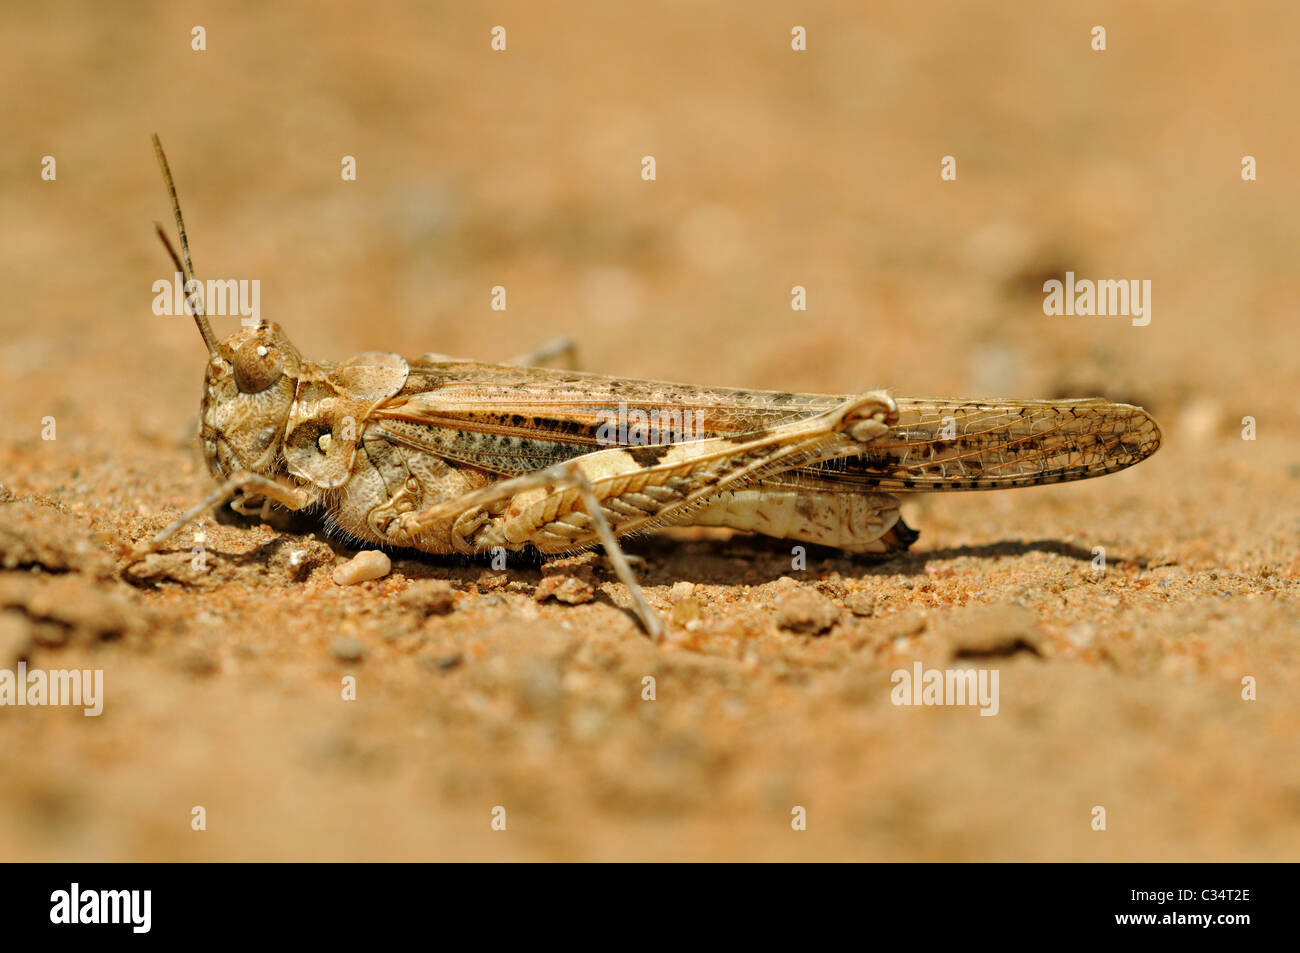 Adaptation of Short-horned Grasshopper to the color and texture of the underground, Goegap Nature Reserve, South Africa Stock Photo